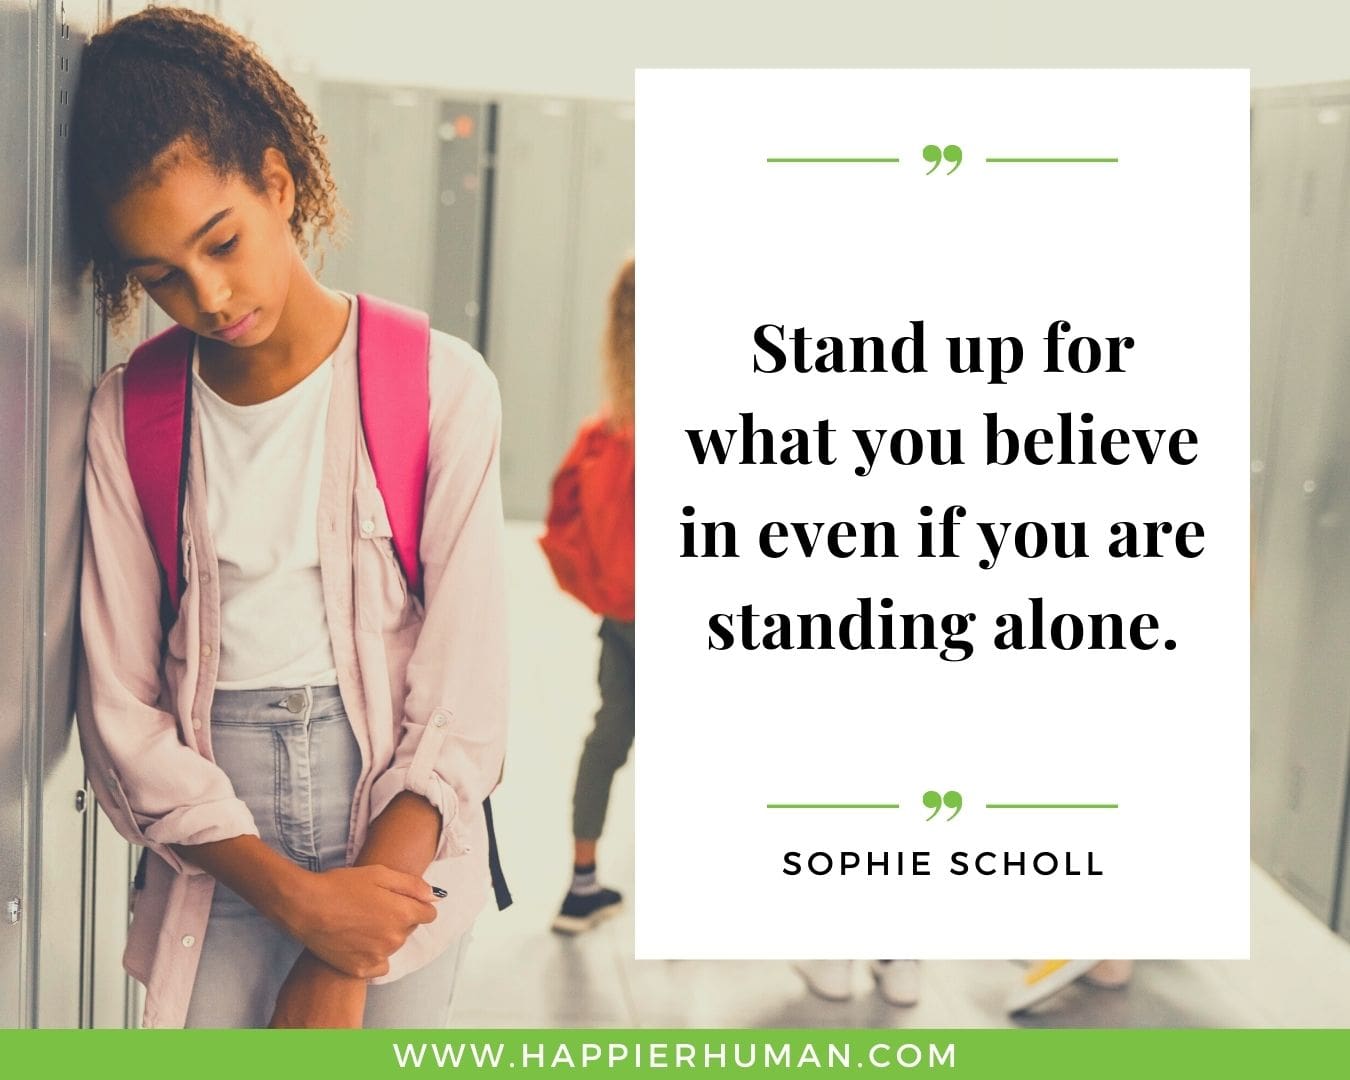 Loneliness Quotes - “Stand up for what you believe in even if you are standing alone.” – Sophie Scholl